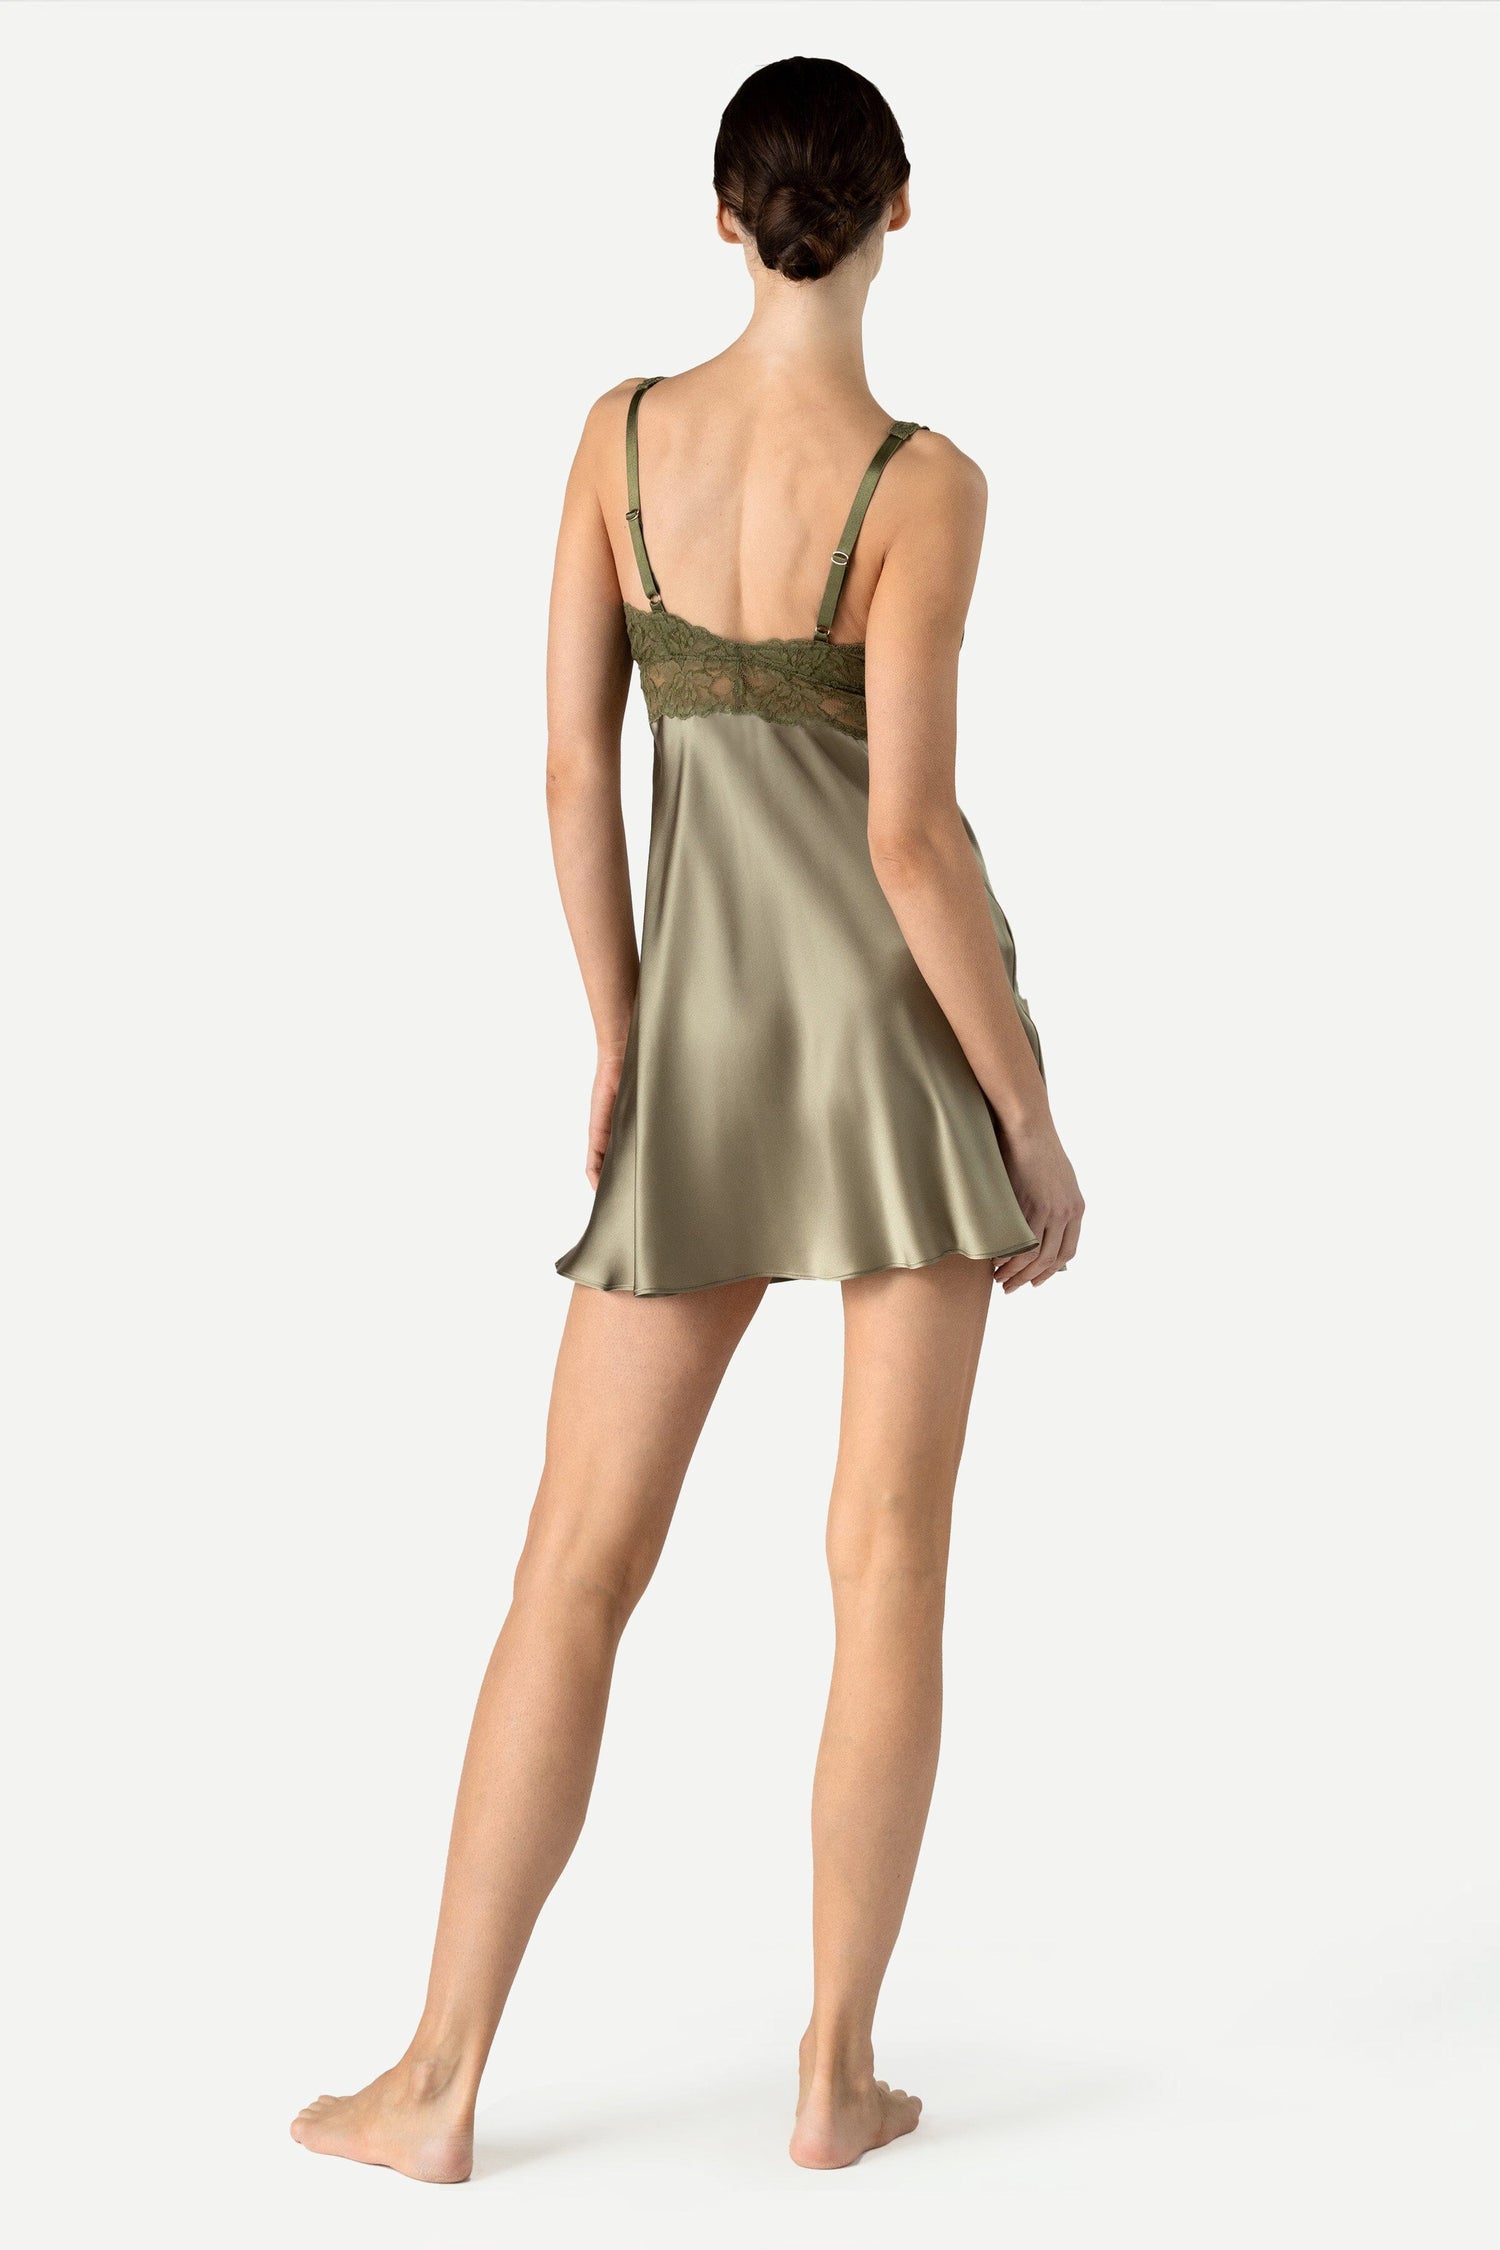 iCollection Womens Satin Chemise Style-7916